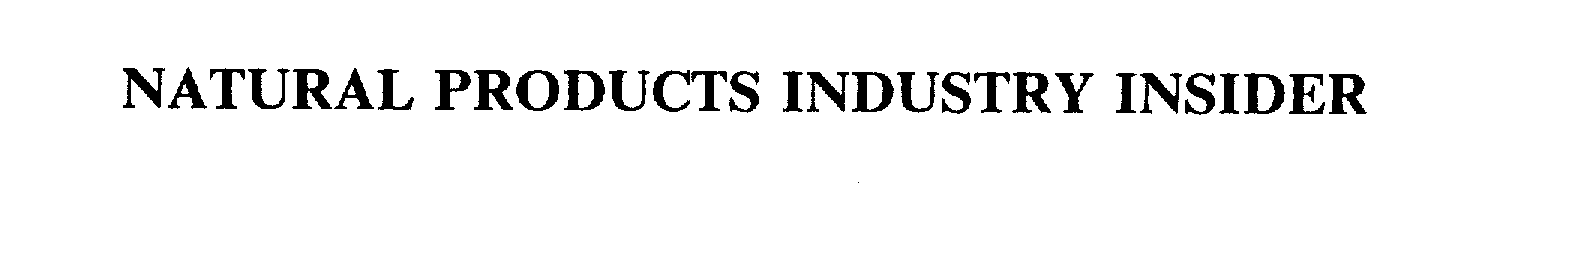  NATURAL PRODUCTS INDUSTRY INSIDER